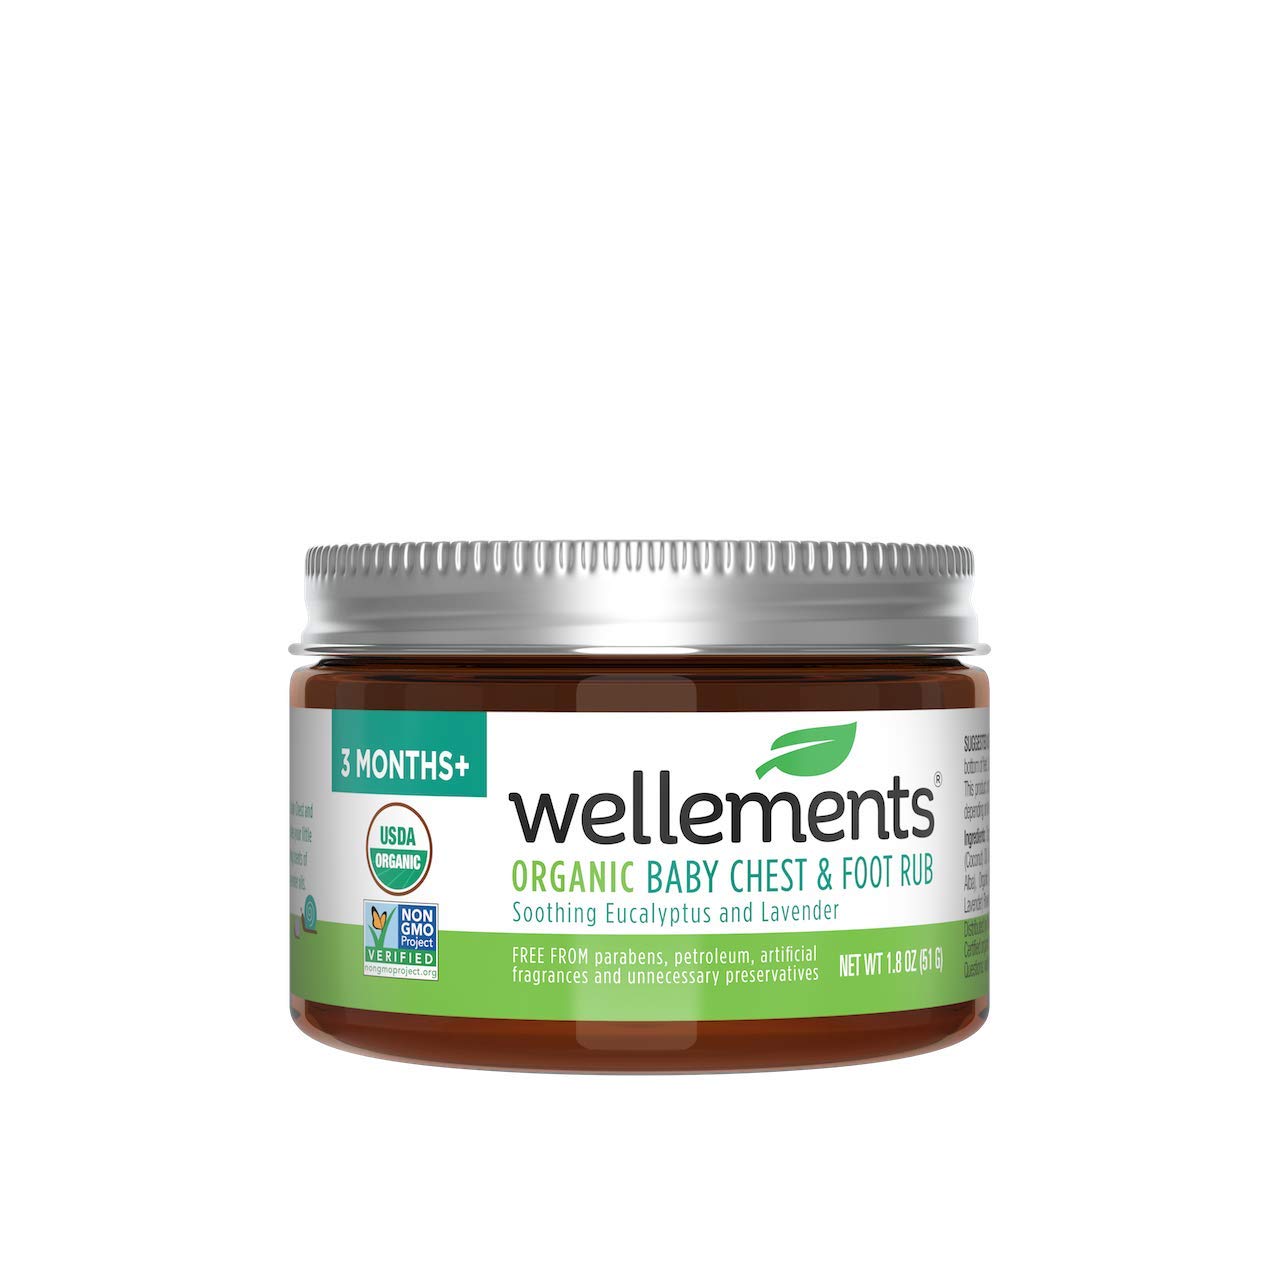 Wellements Organic All Purpose Balm for Infant & Toddler